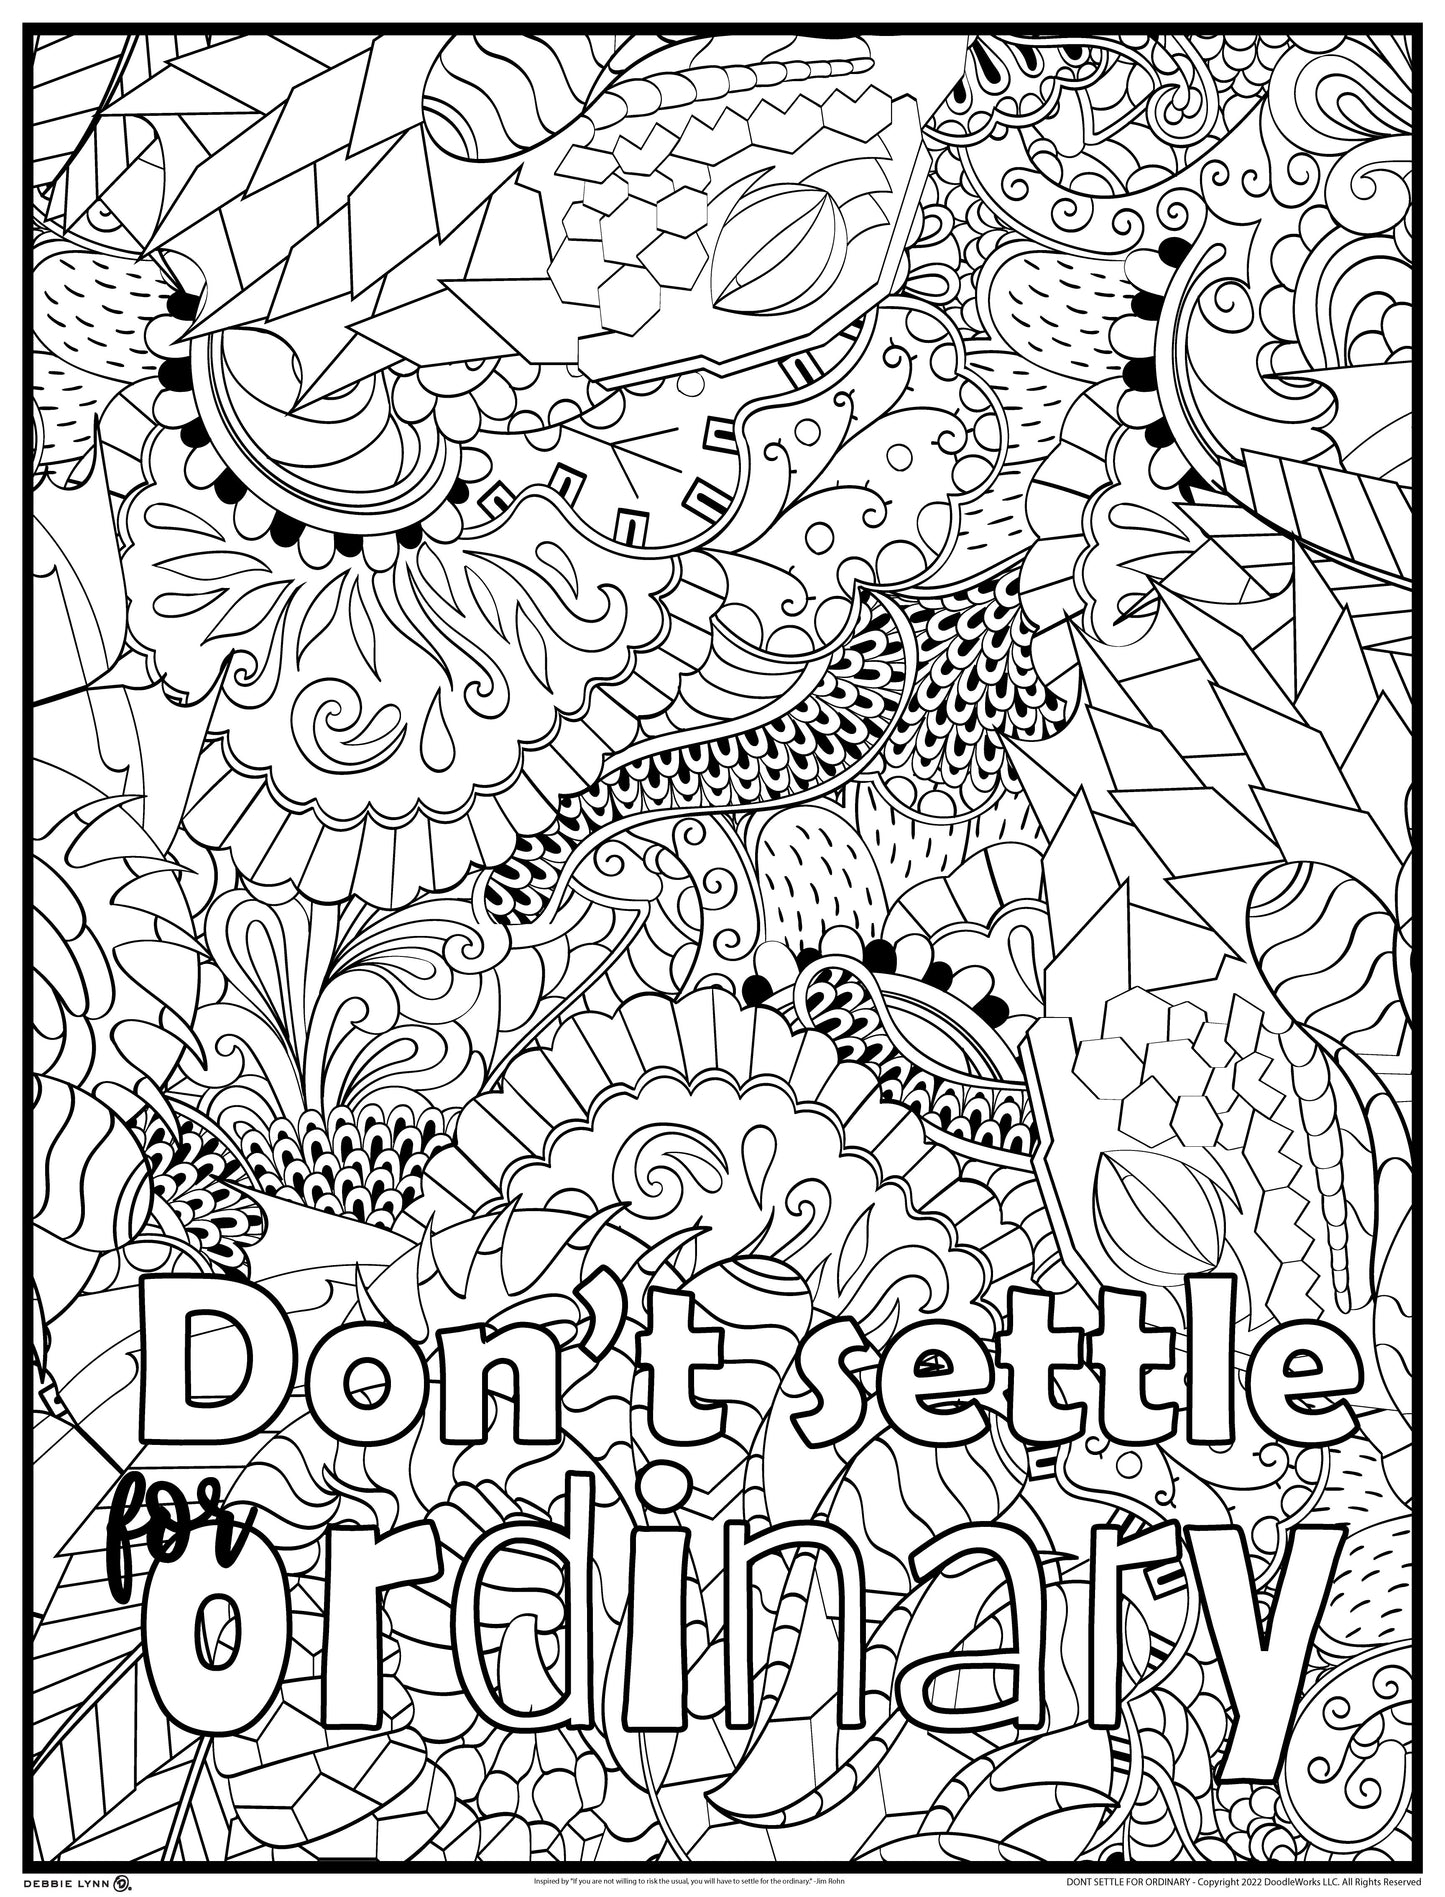 Don't Settle for Ordinary Personalized Giant Coloring Poster 46"x60"